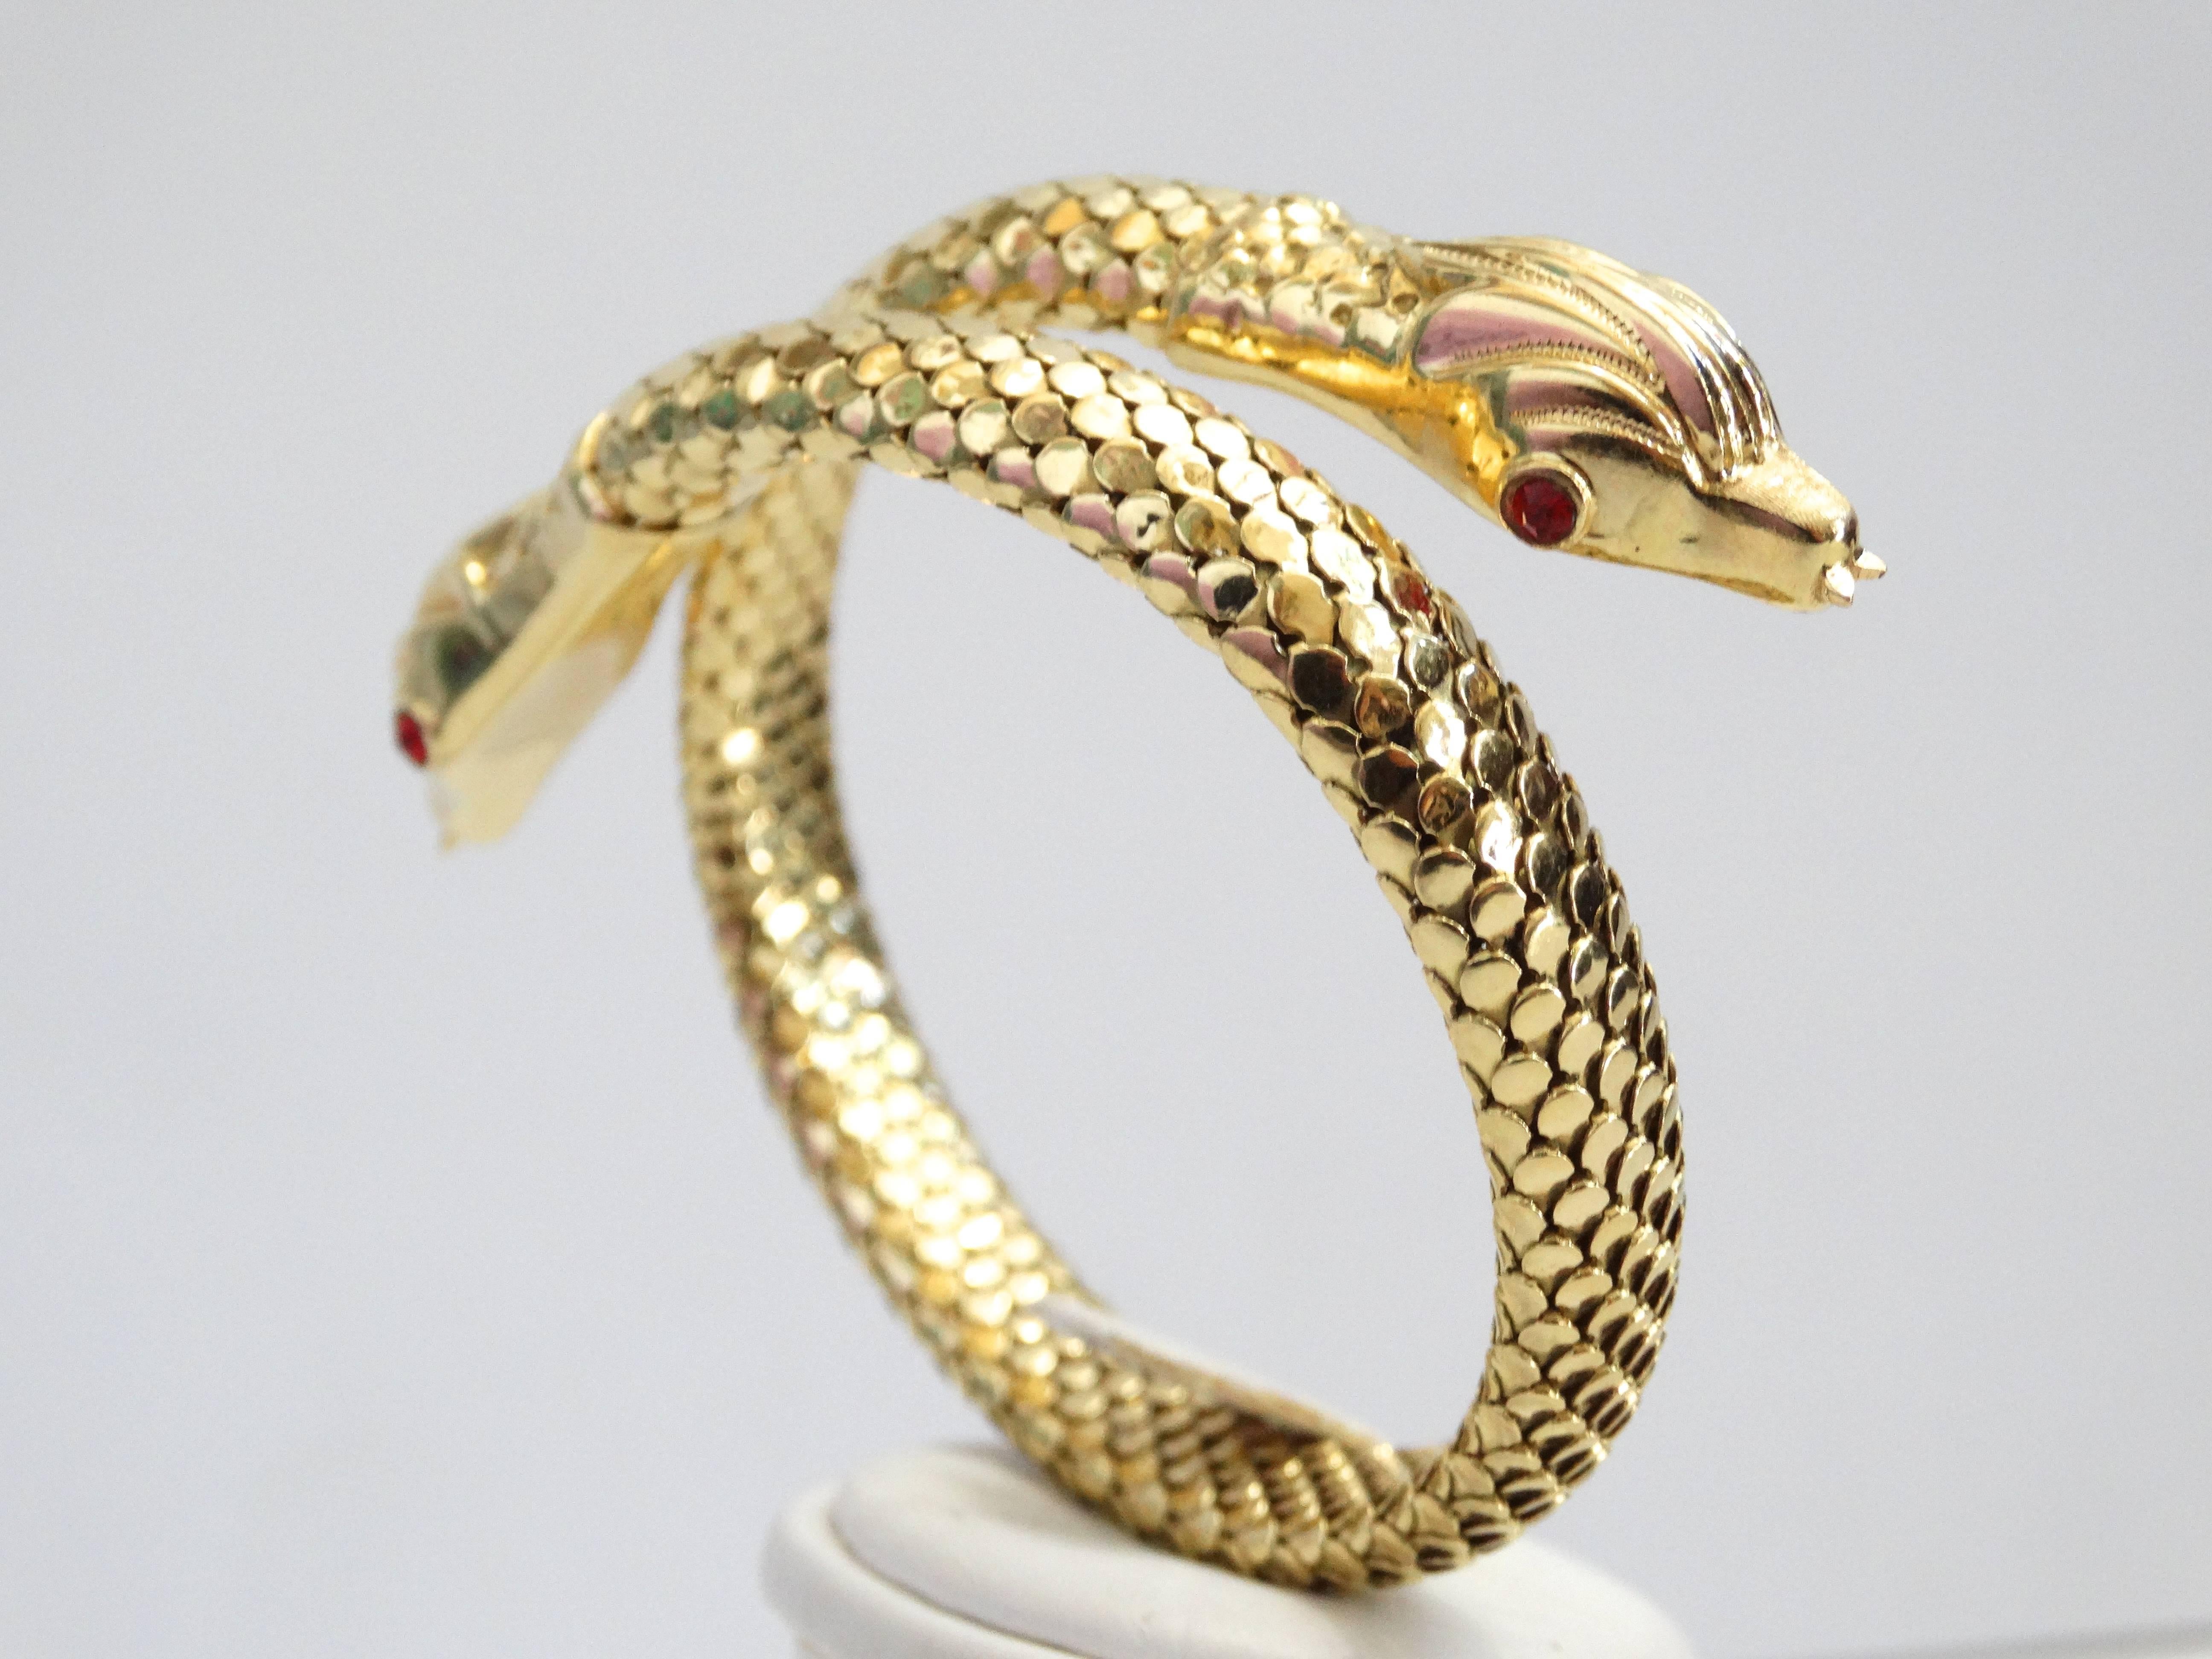 A beautiful and unusual snake bracelet from the mid-century era. Crafted in 18 karat yellow gold, a double serpent body which coils one time around the wrist. The body is textured with small gold plaques piece together to represent scales ( if you